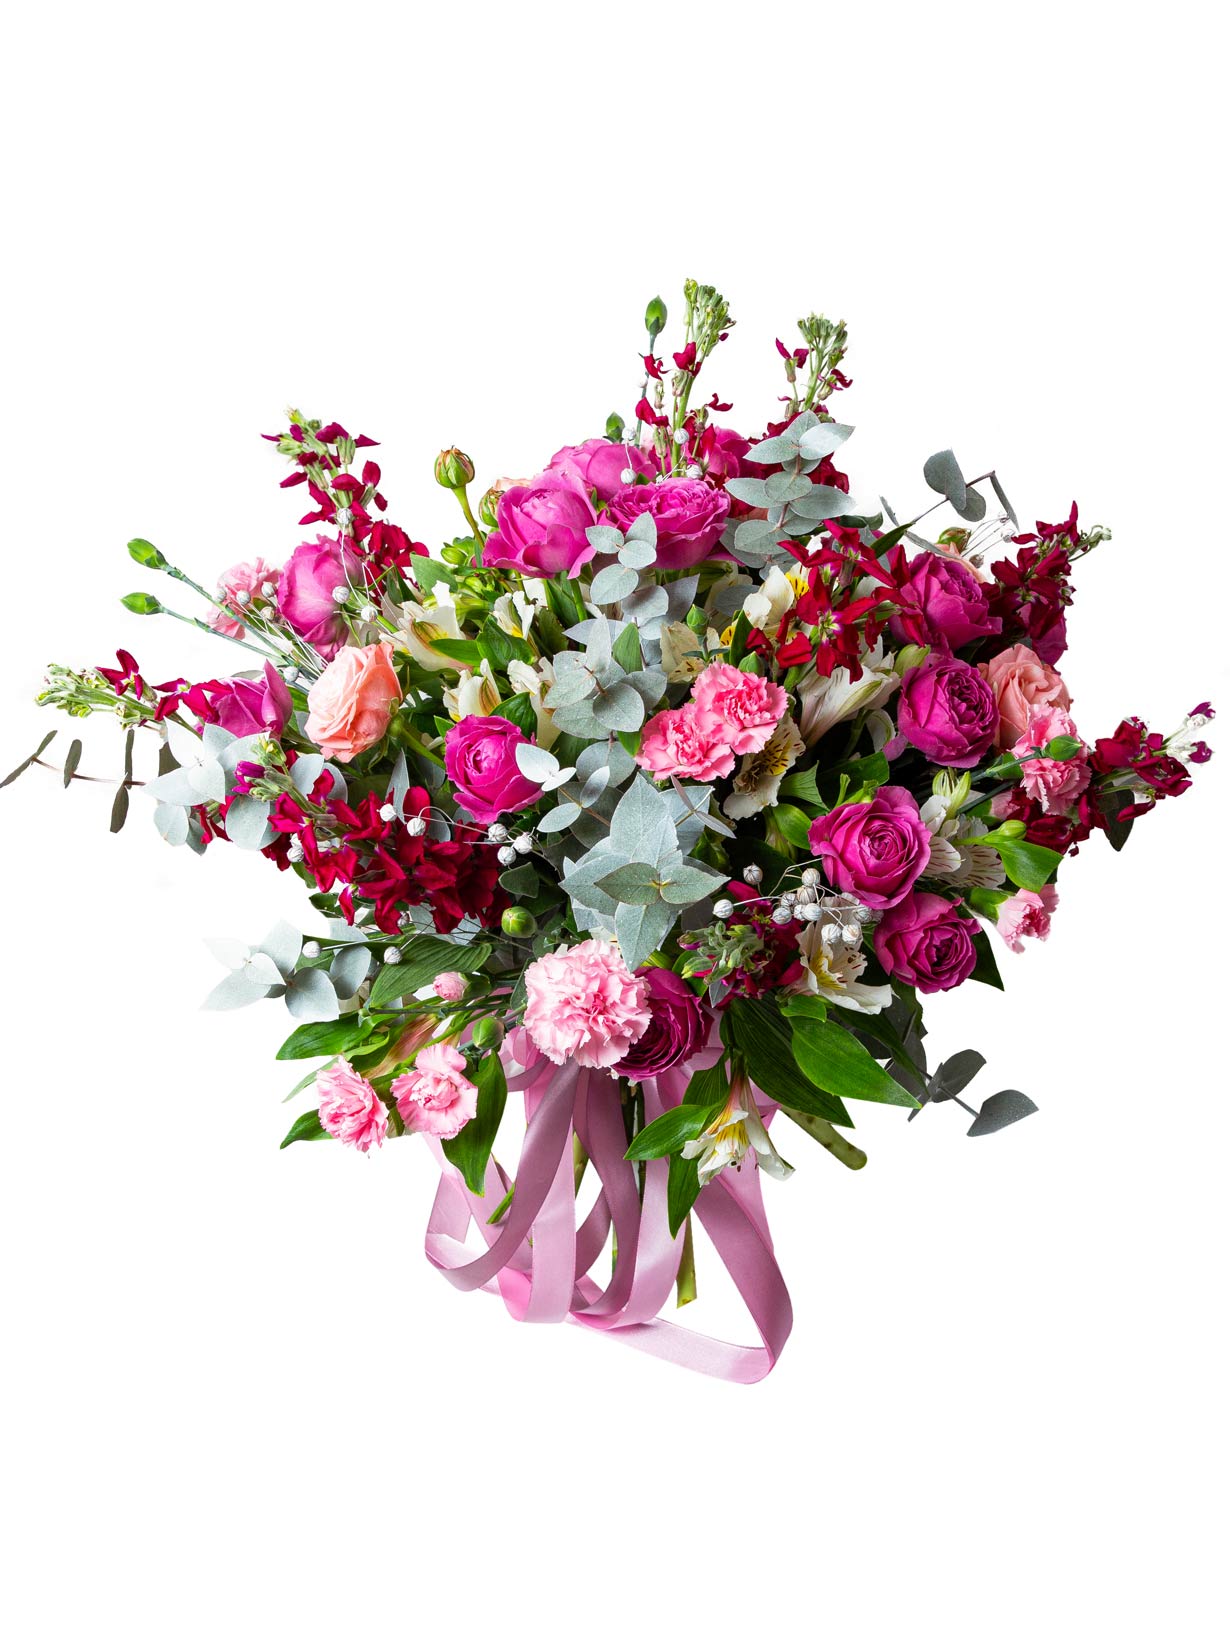 Bouquet «Vohilaid» with spray roses and matthiolas